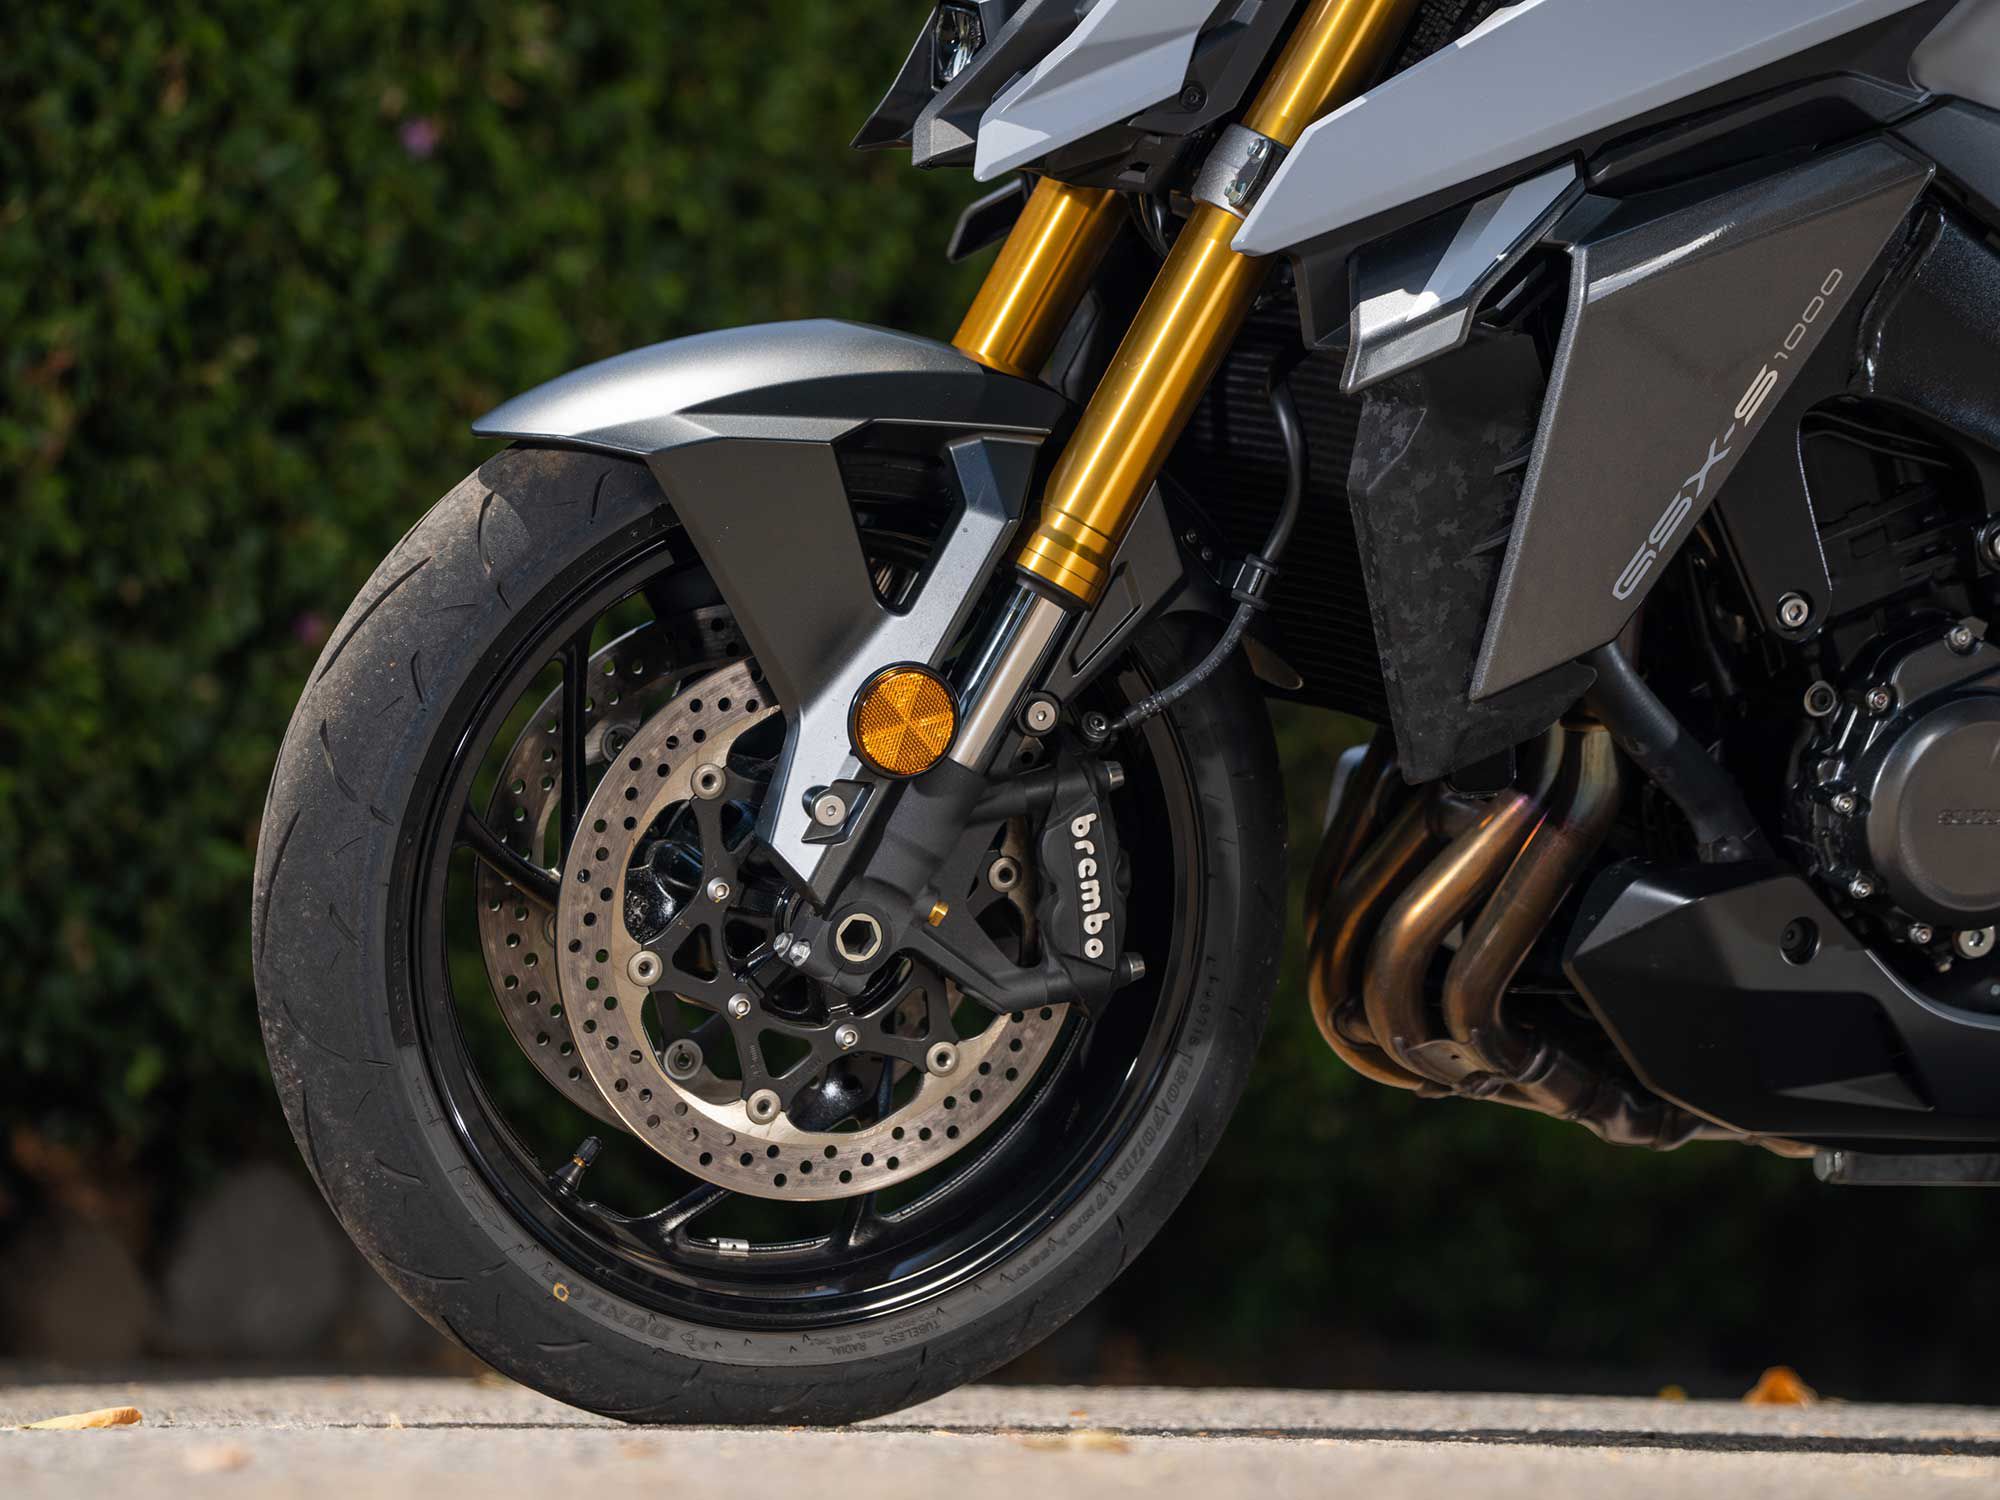 The Suzuki rolls on a stout set of hydraulic disc brakes that do a fine job of slowing down the 472-pound GSX-S1000.